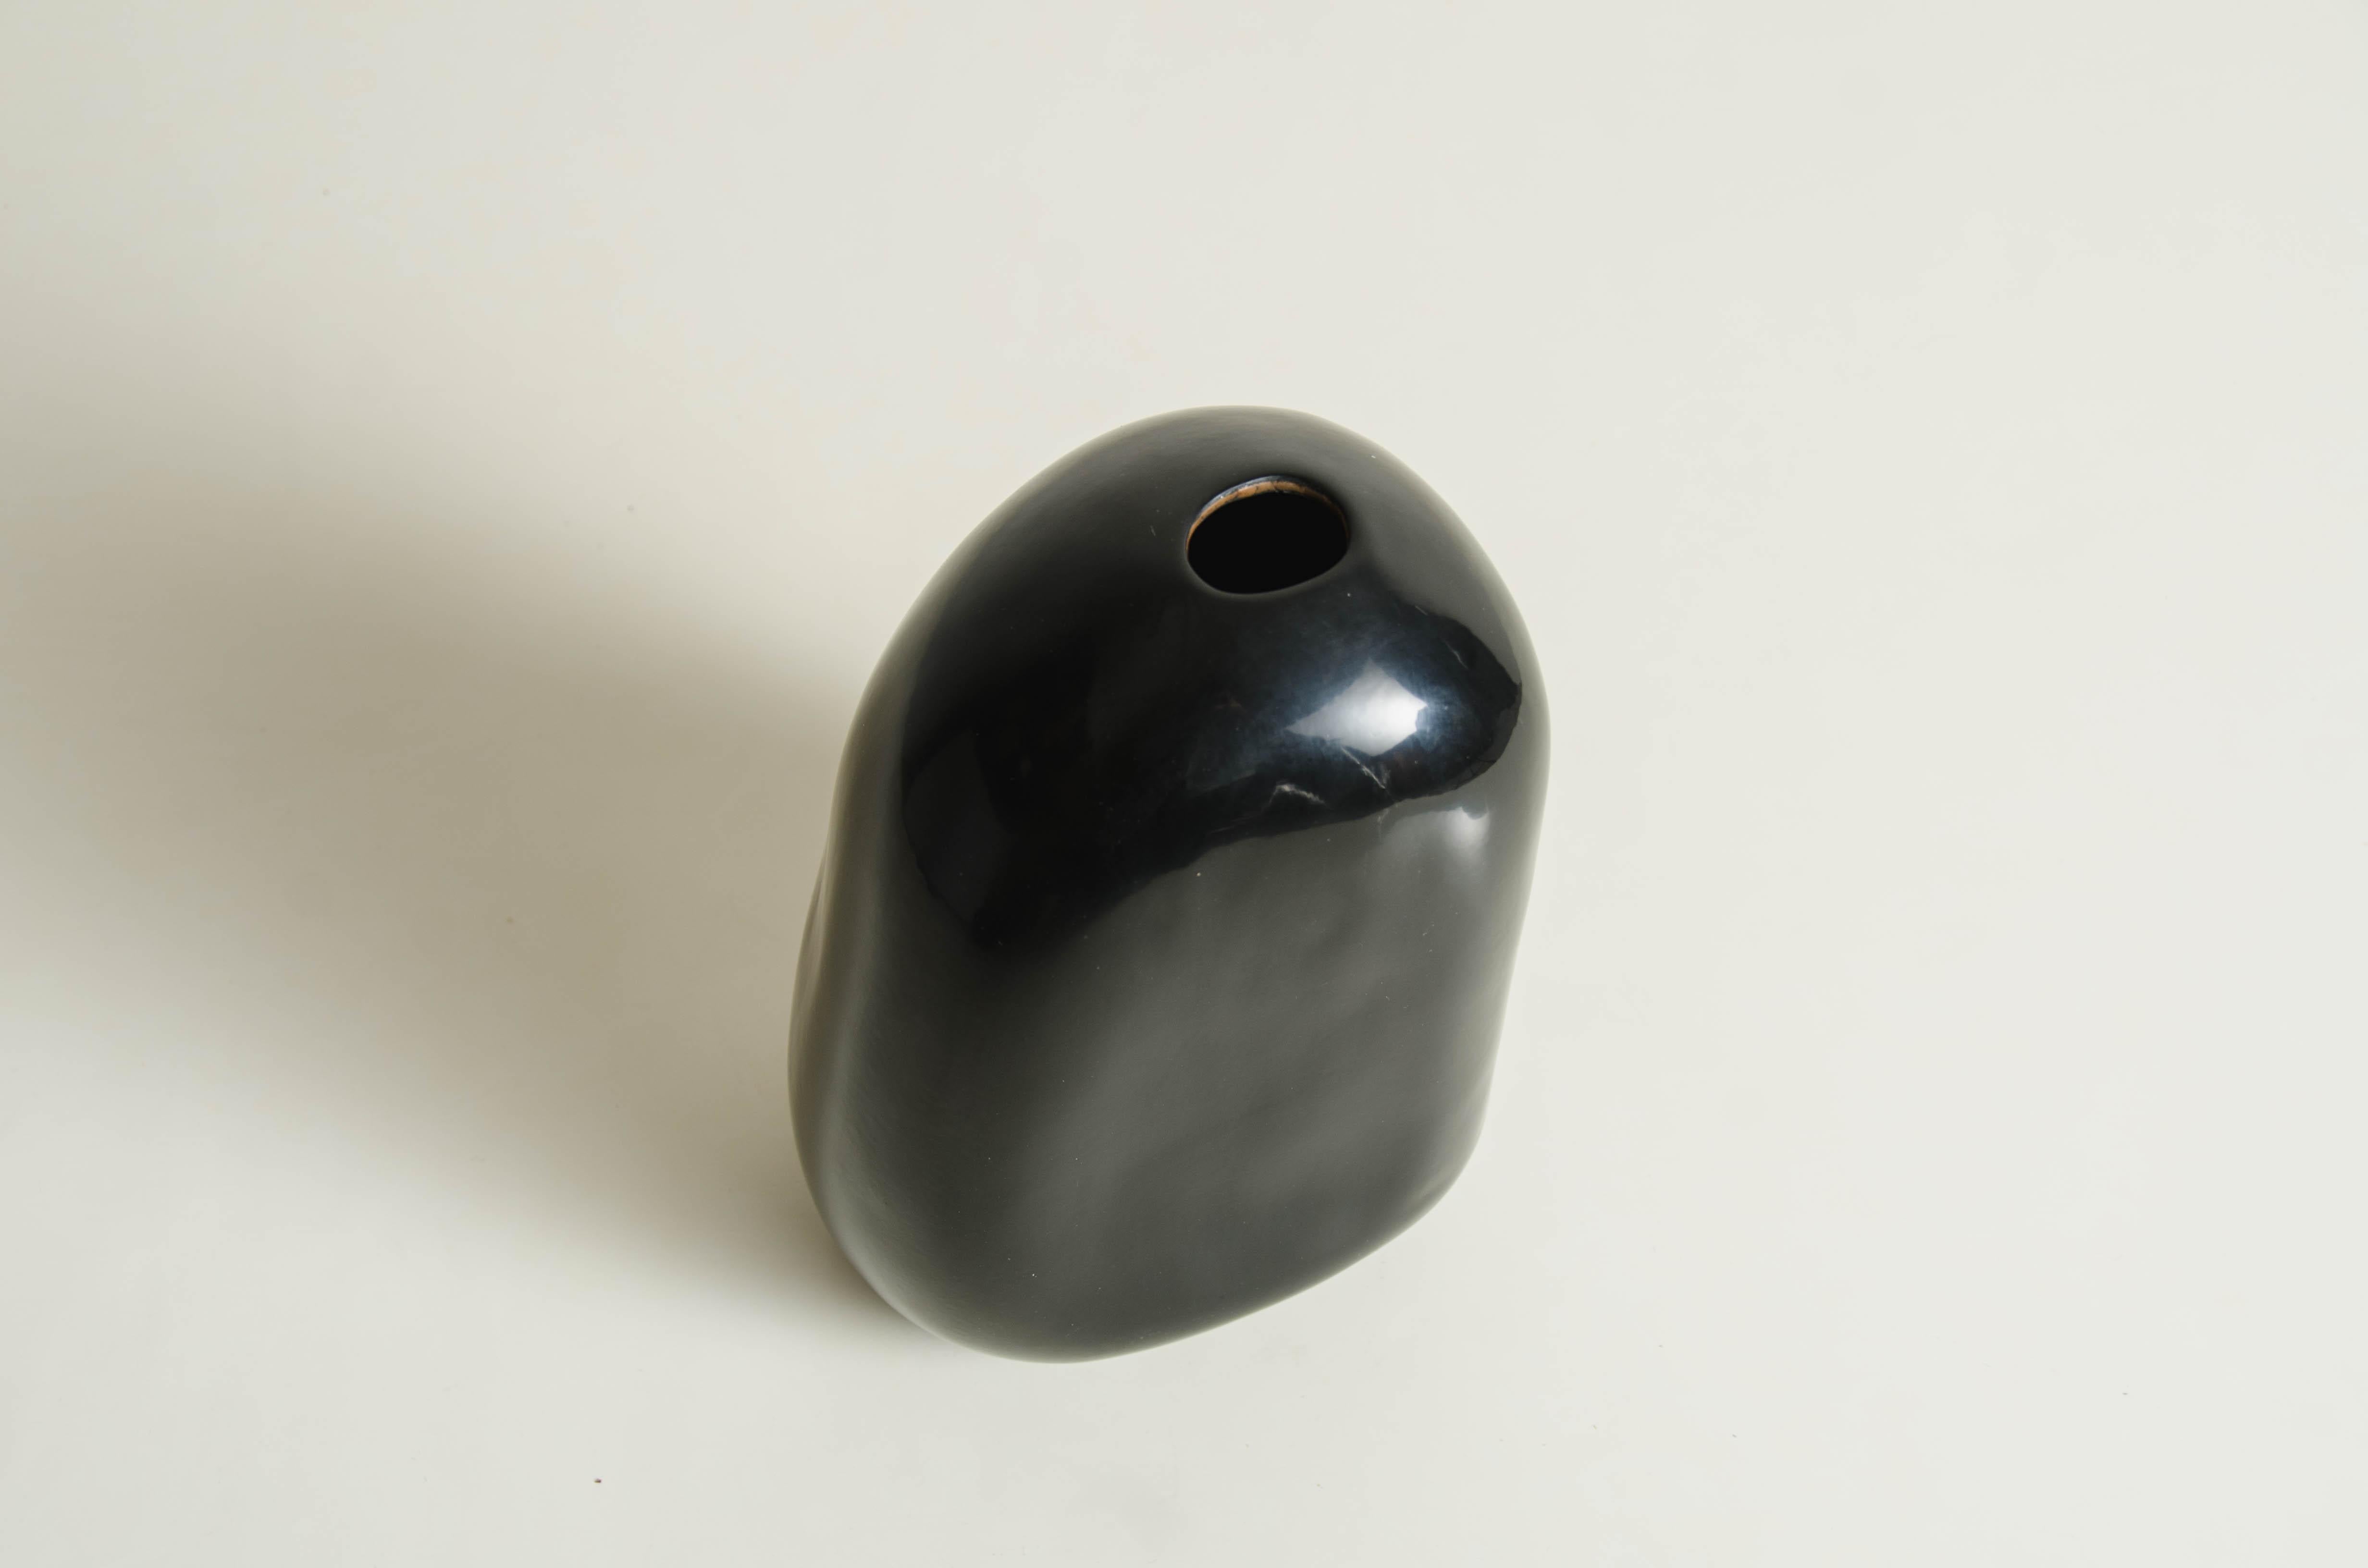 Repoussé Rock Bud Vase, Tall, Black Lacquer by Robert Kuo, Handmade, Limited Edition